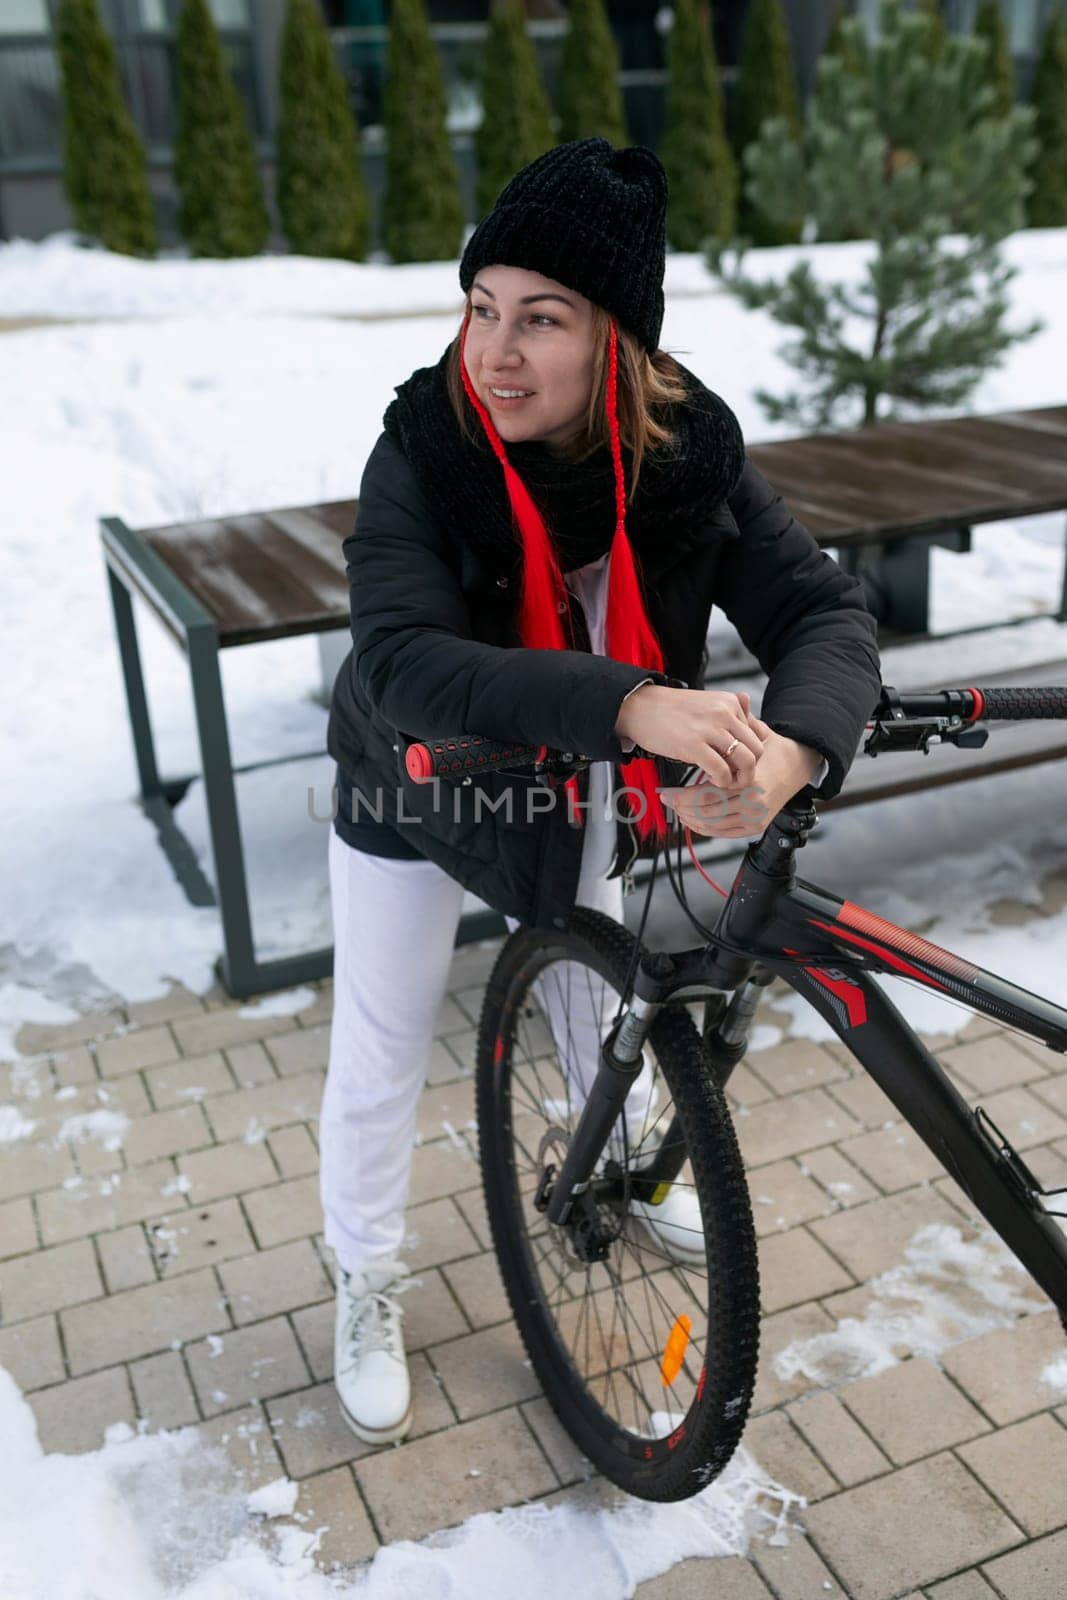 European woman in winter clothes riding a bicycle in winter.